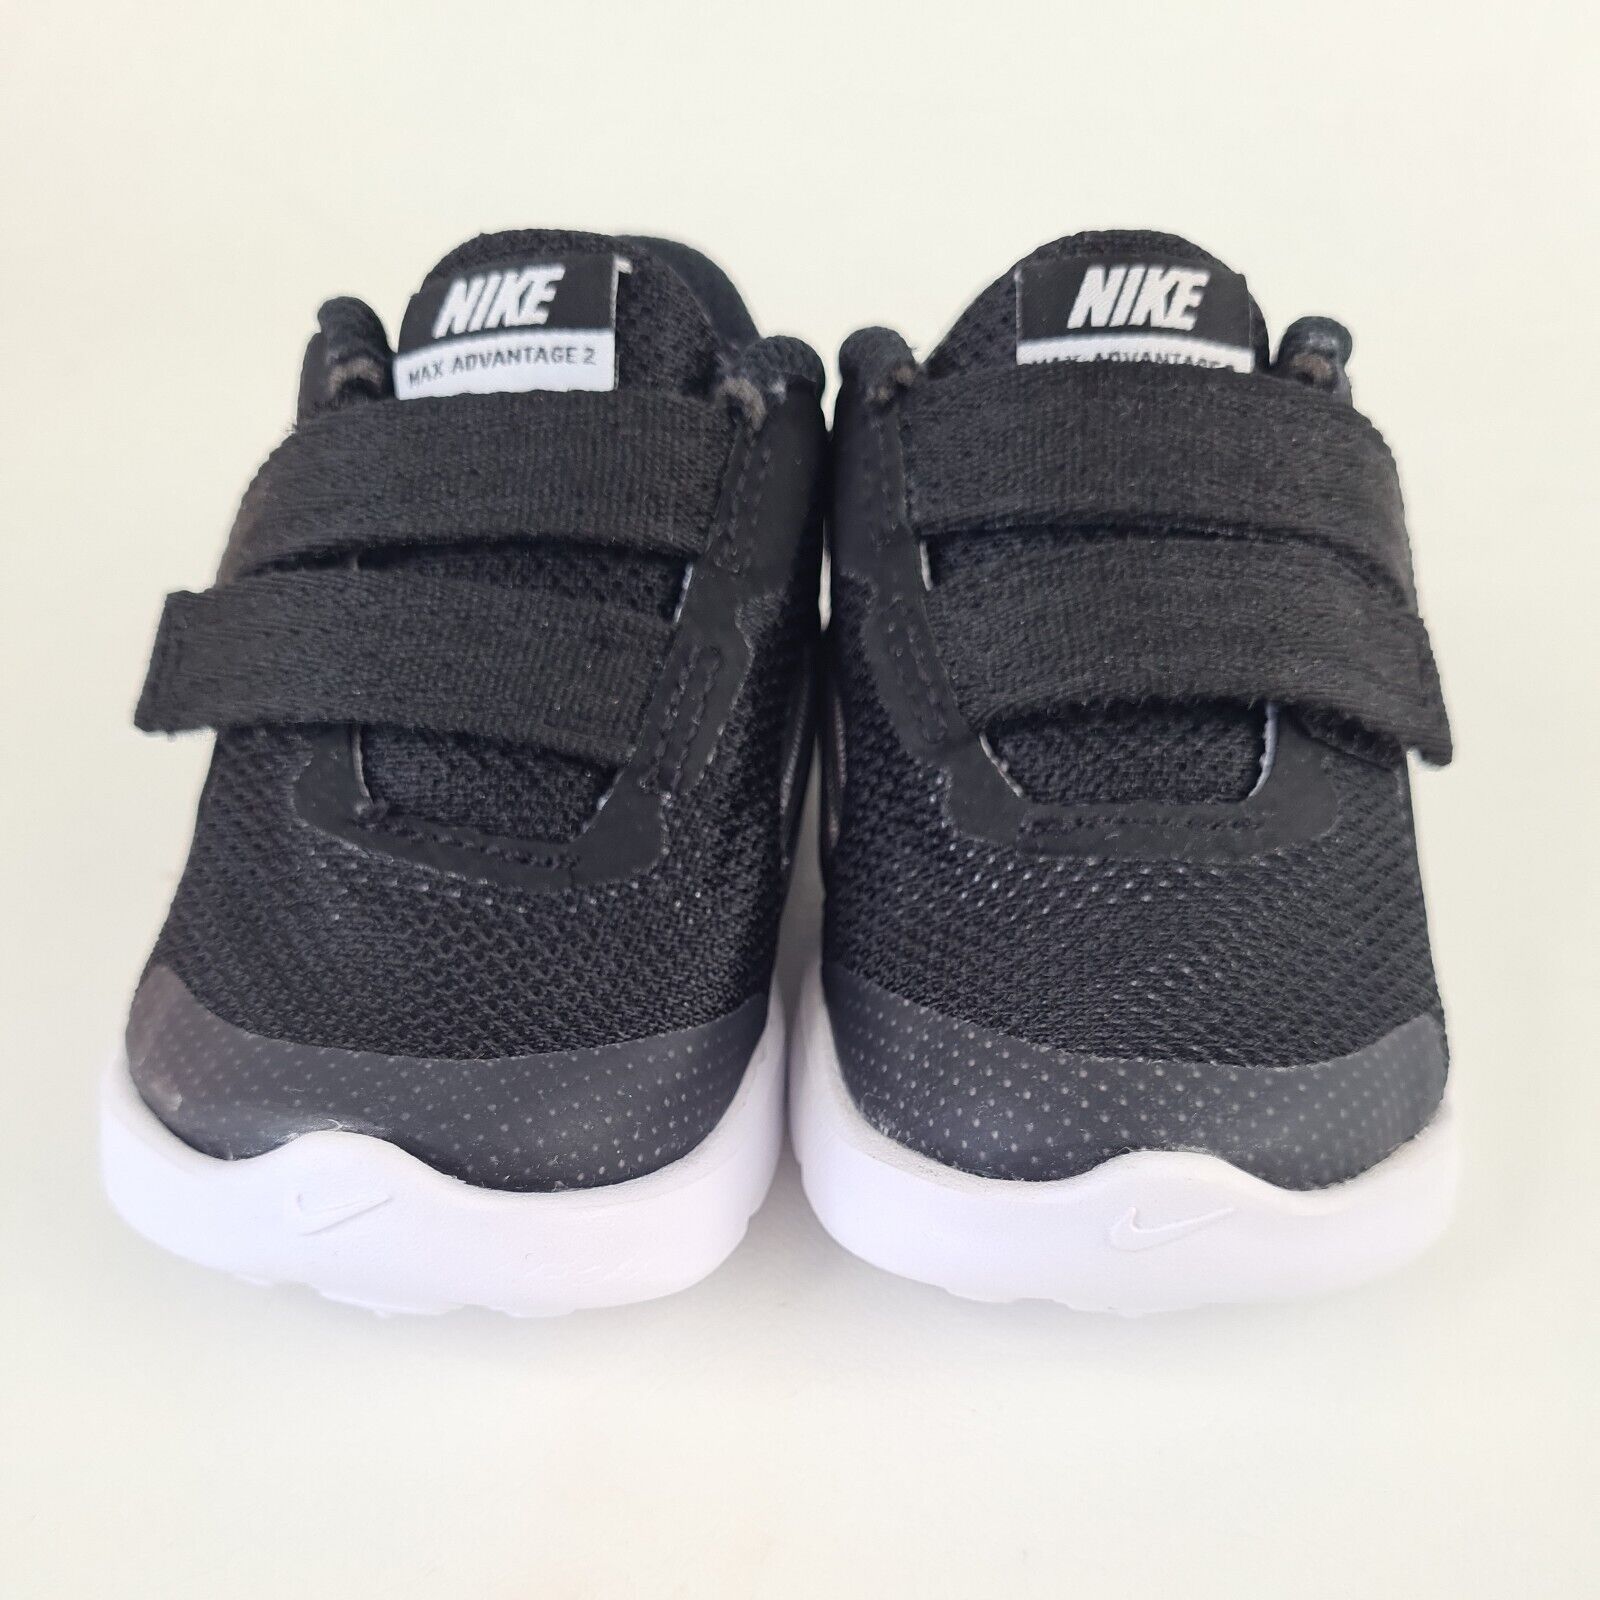 Nike Air Max Advantage 2 TODDLER Shoes Black AR1820 002 Sneakers Athletic SZ 6 C - Picture 4 of 12